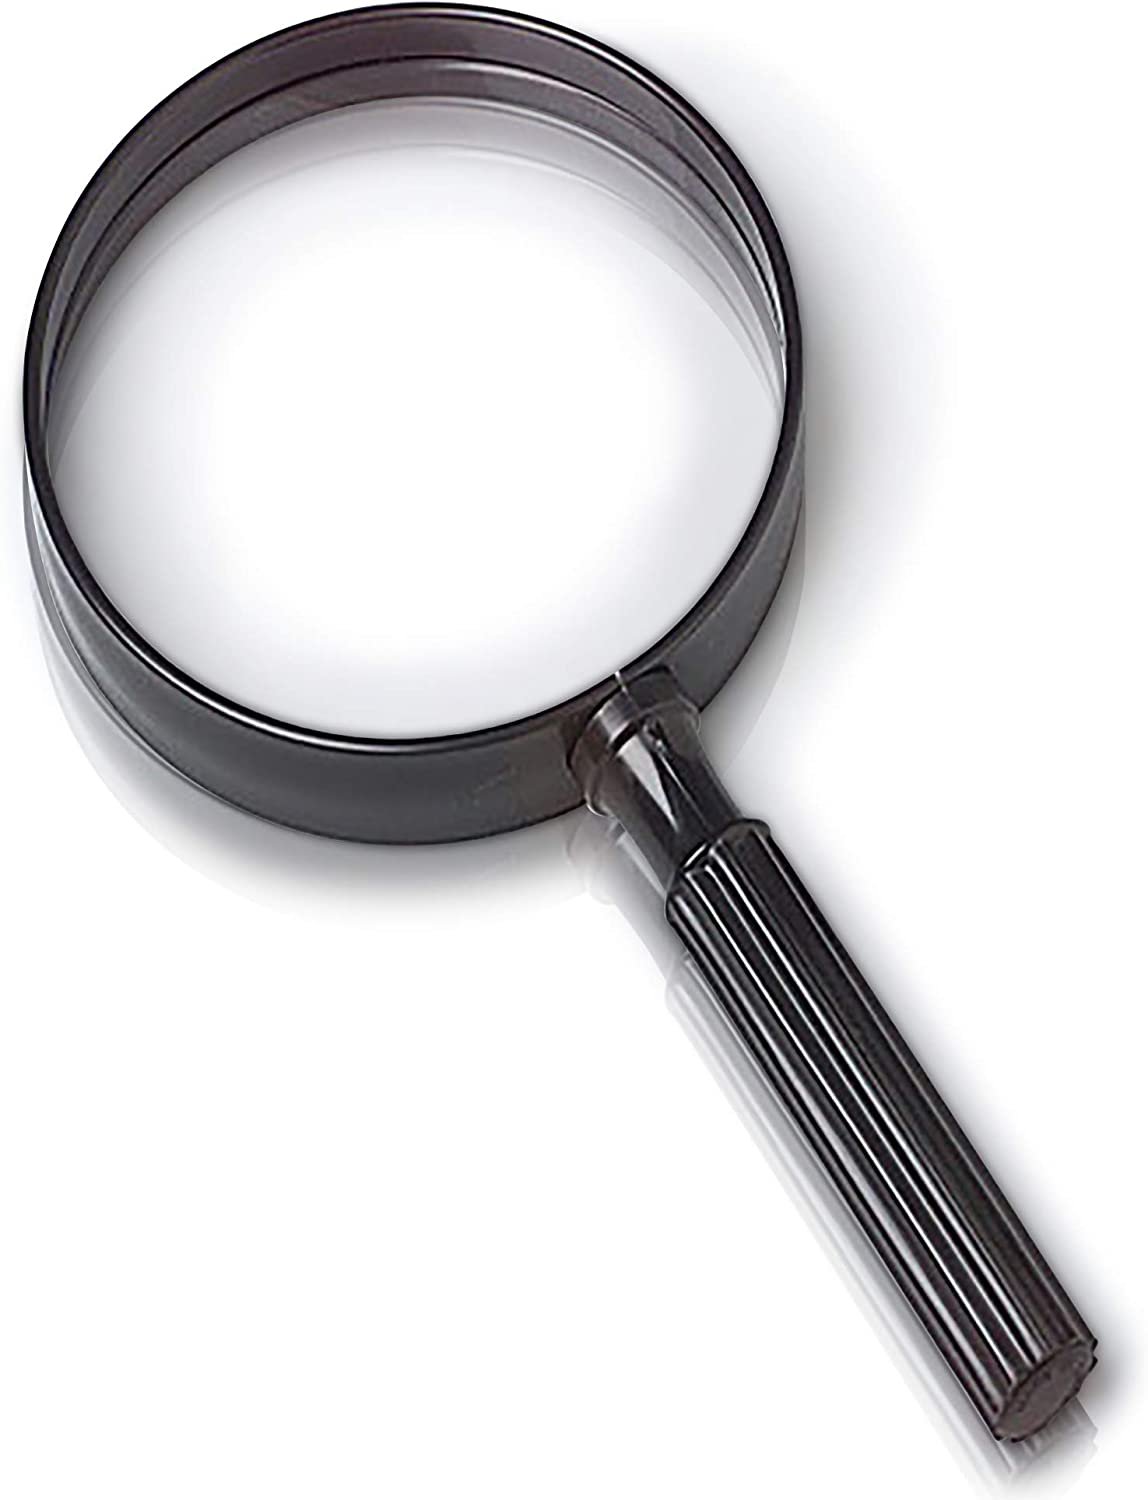 Giant Kids Magnifying Glass - 9" Jumbo Magnifier - Fun Young Explorer and Adventure Toys for Boys and Girls, Spy Costume Prop, Great Gift Idea or Party Favor for Children